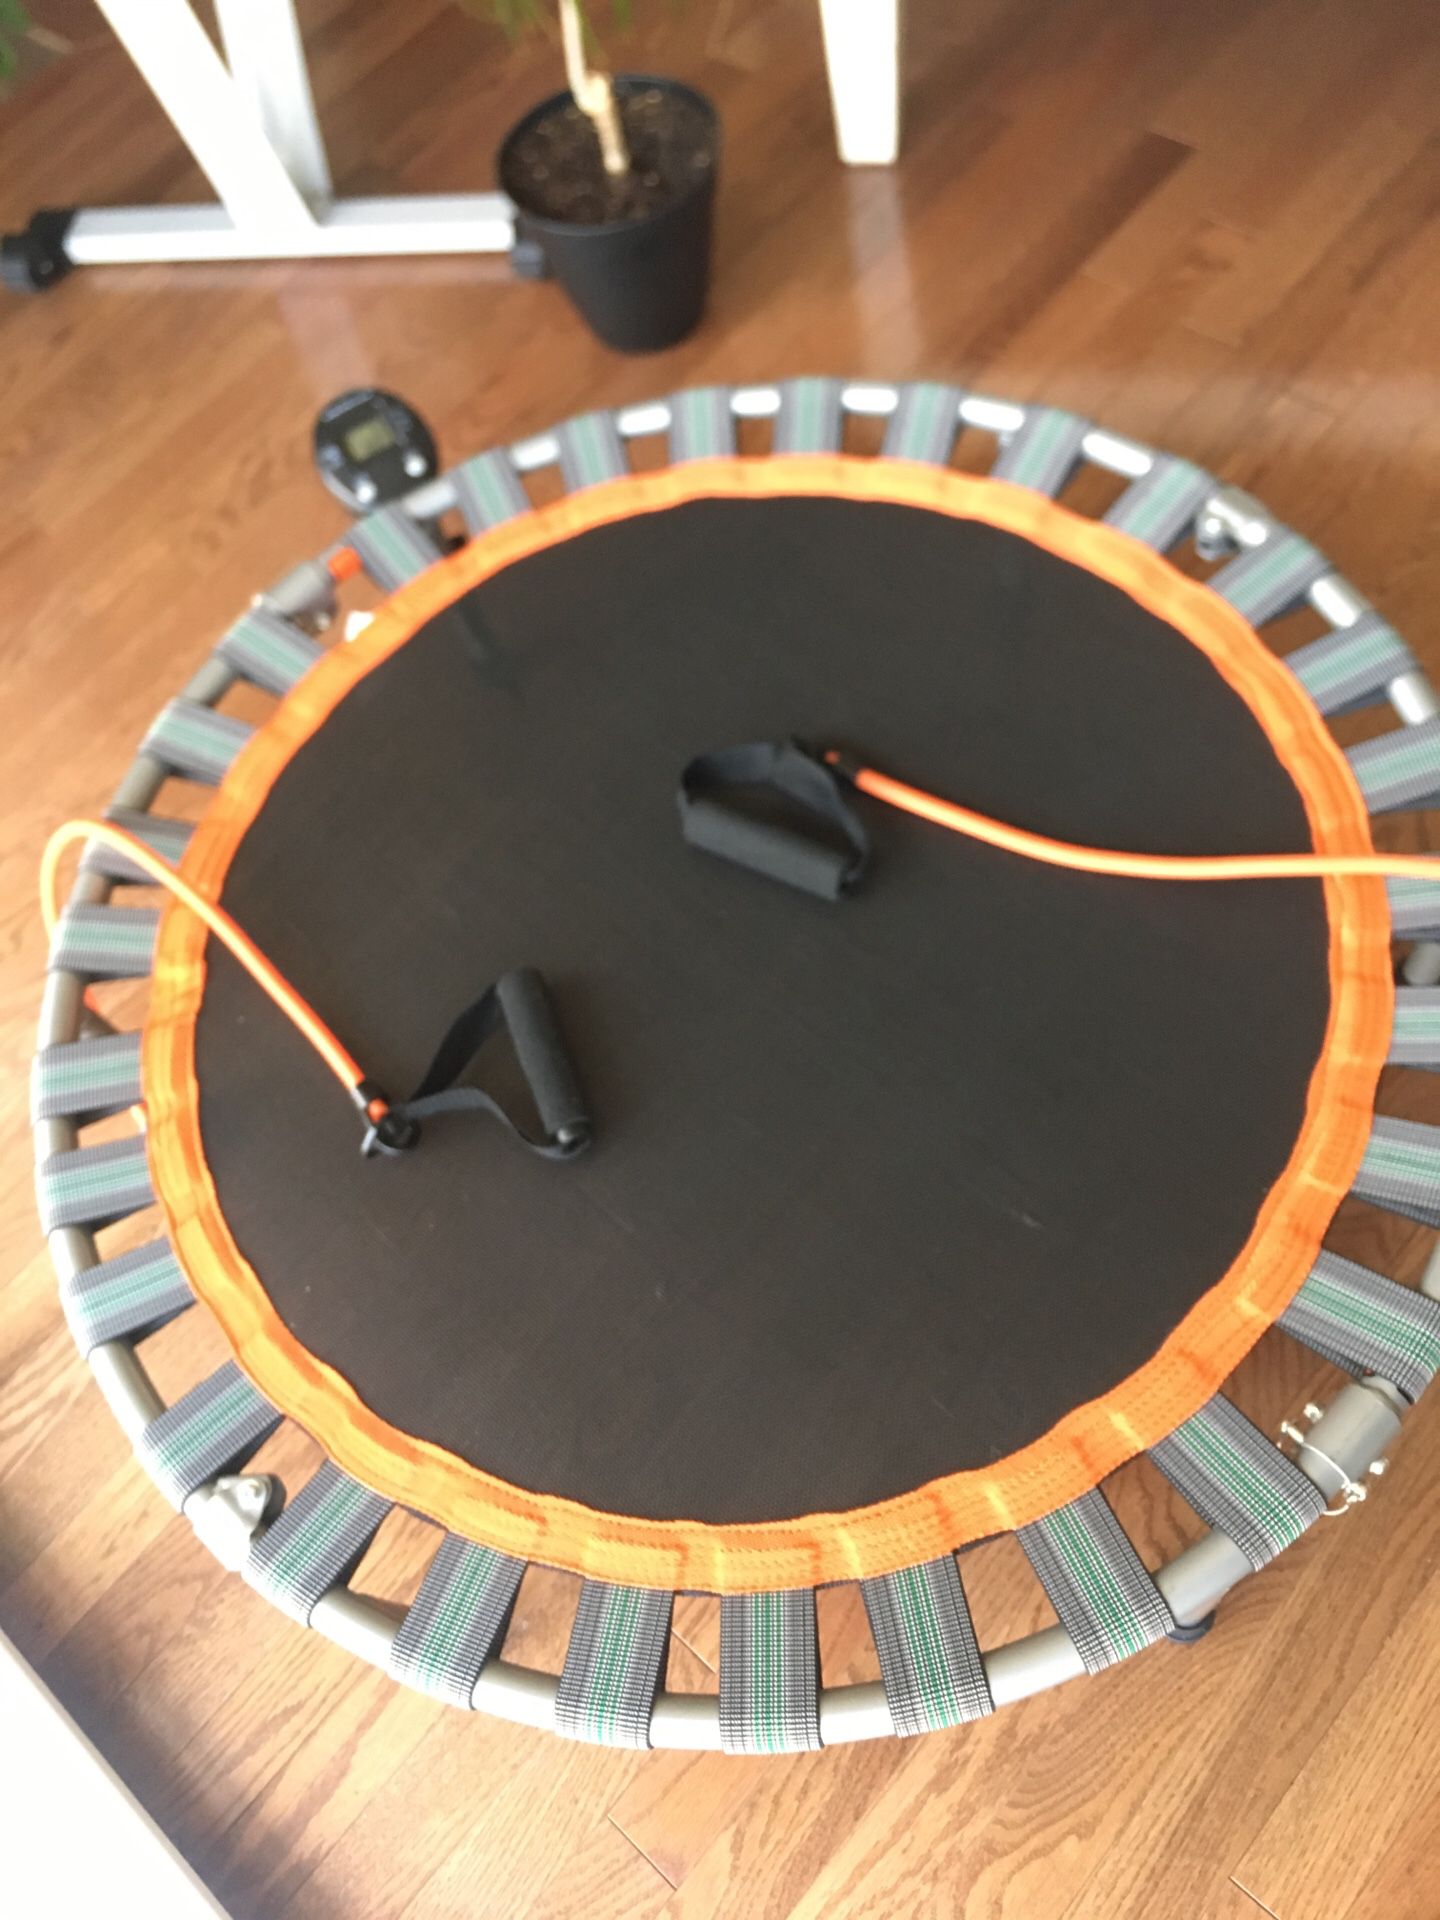 Mini trampoline / rebounder with jump counter!